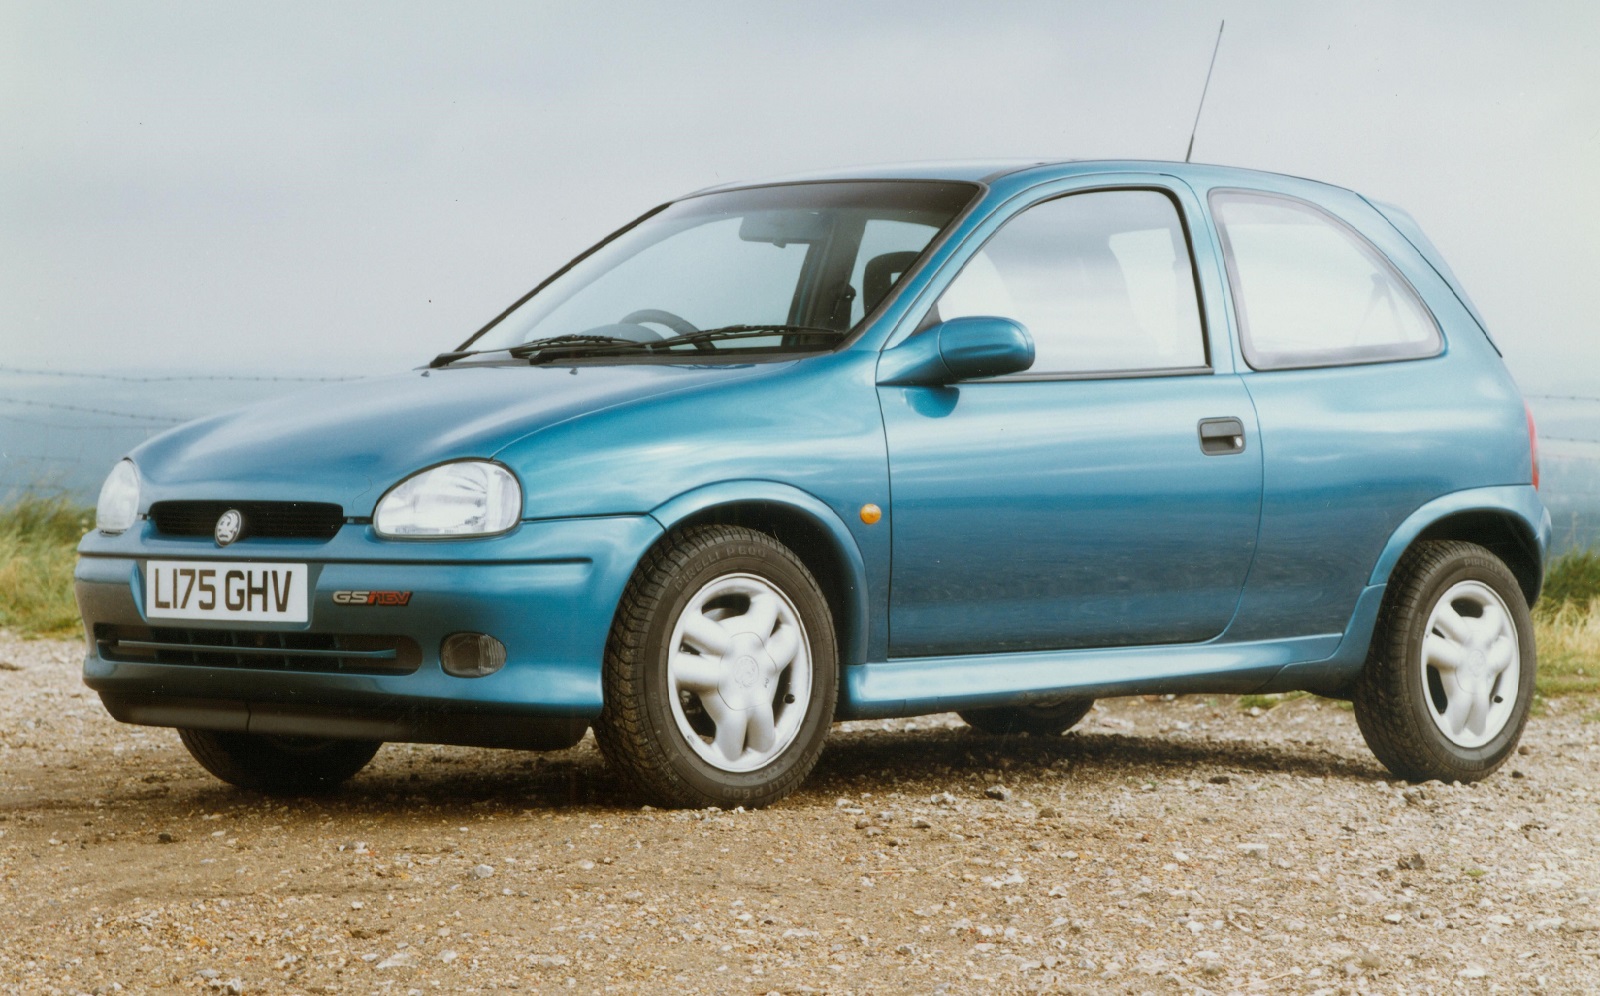 <p>The Corsa name first arrived in 1982 for continental European buyers. In Britain, the car was known as the <strong>Nova</strong> and sold more than half a million between 1982 and 1993 when the Brits adopted the Corsa name for the second generation of this supermini. From there, sales soared further and it continues to feature in the top three best sellers in many countries across Europe. The <strong>Opel/Vauxhall share</strong> of sales stands at about <strong>75/25</strong>.</p>